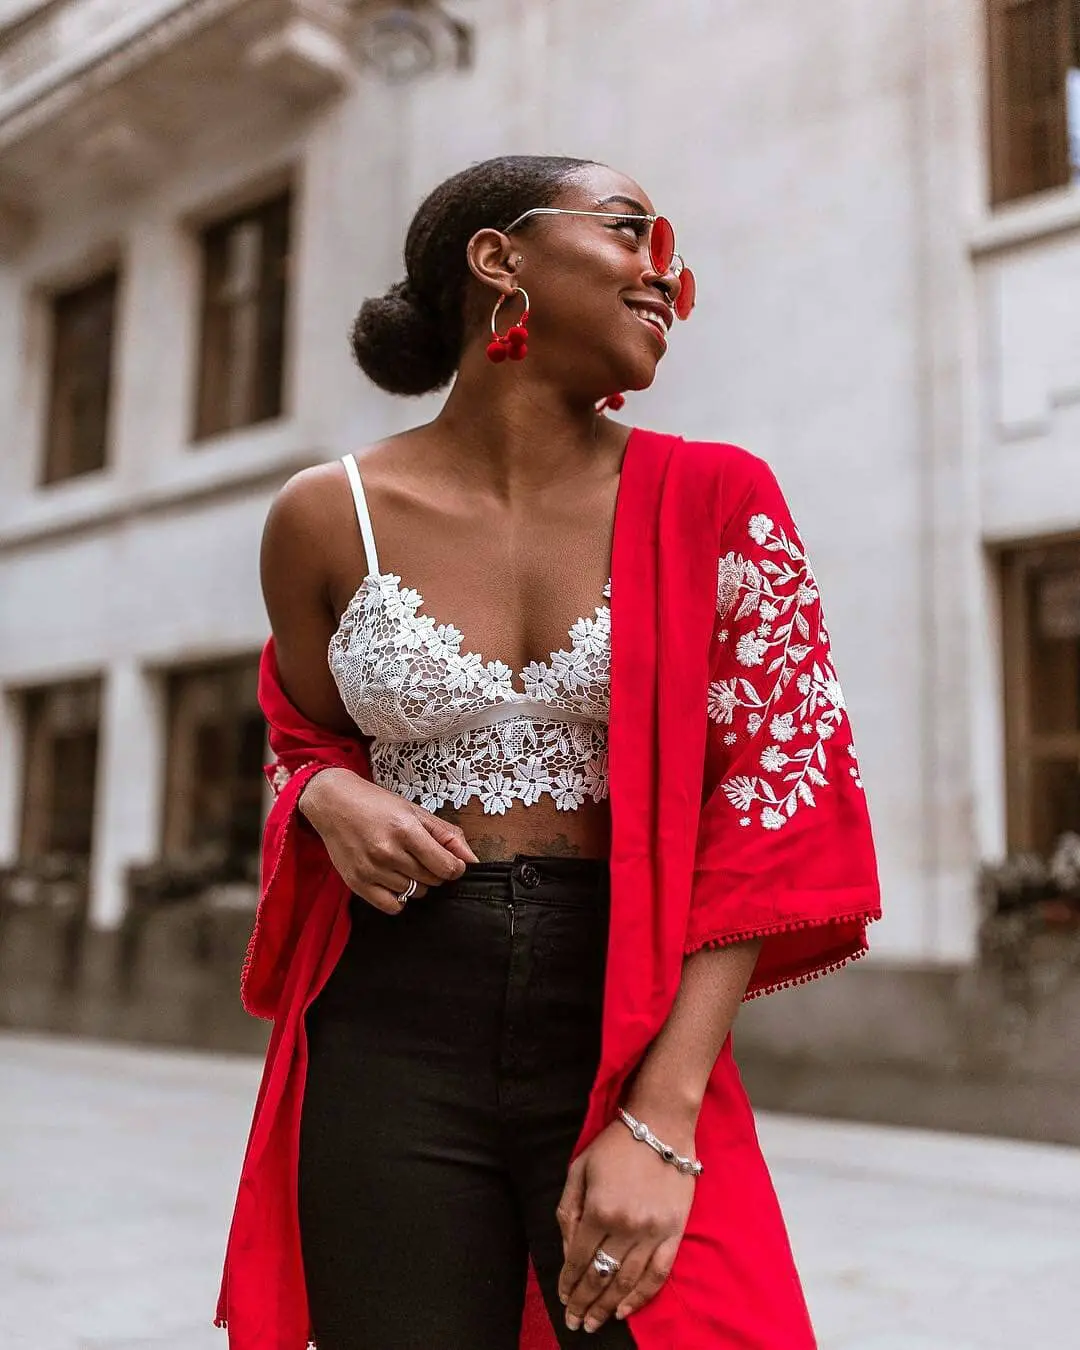 Fashion And Style: Beautiful Outfits Seen On Instagram